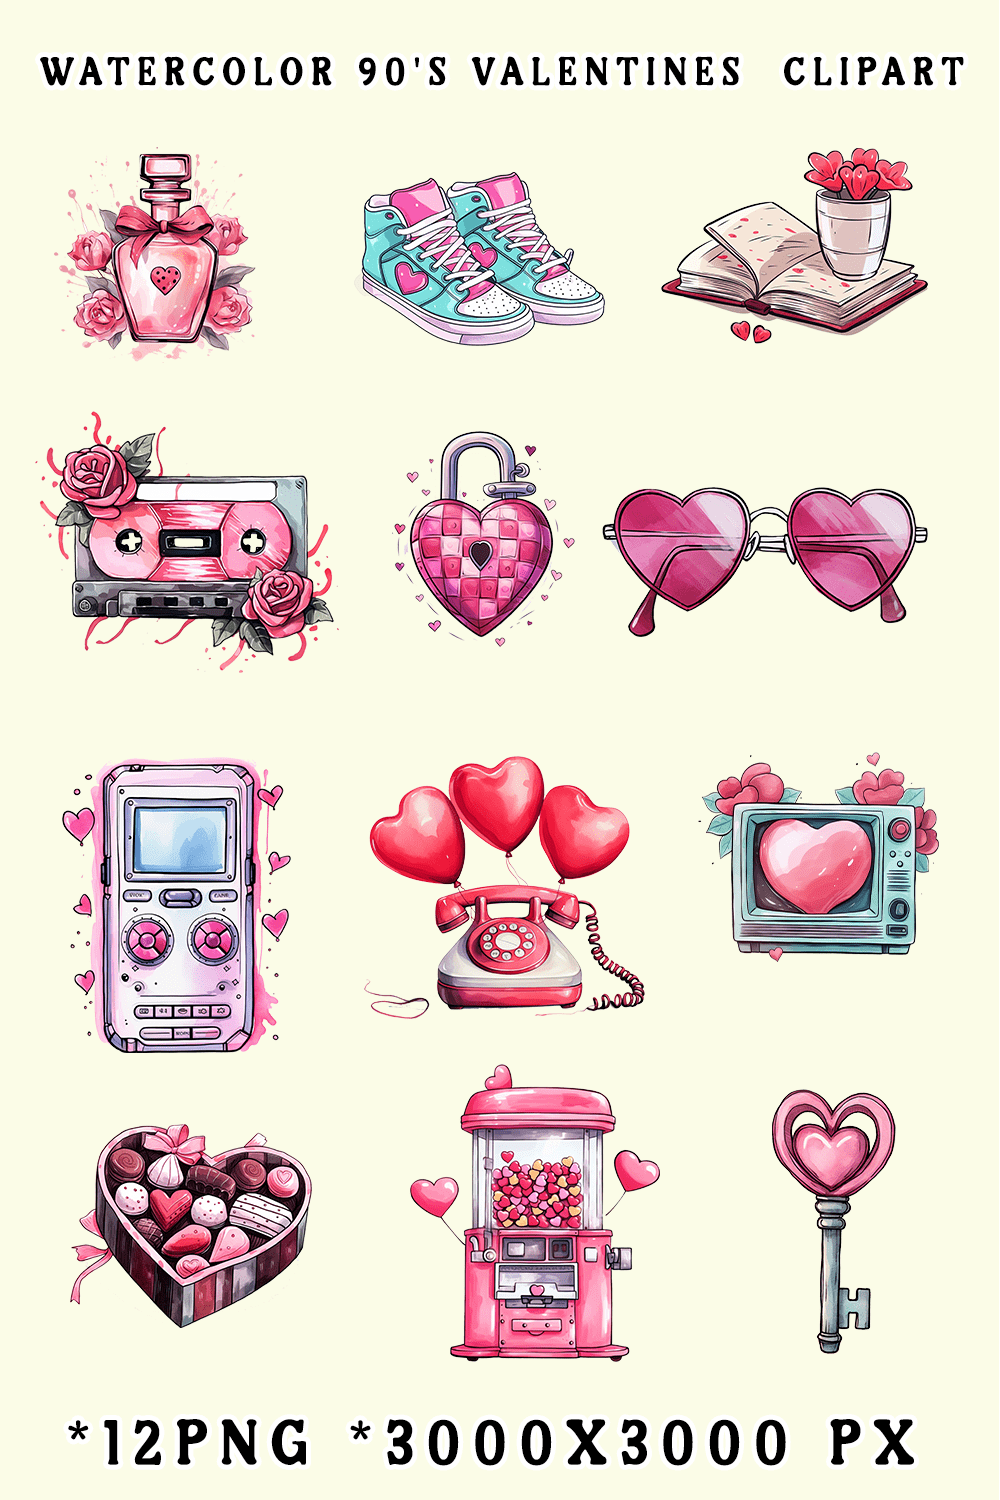 Watercolor 90's Valentines Clipart pinterest preview image.